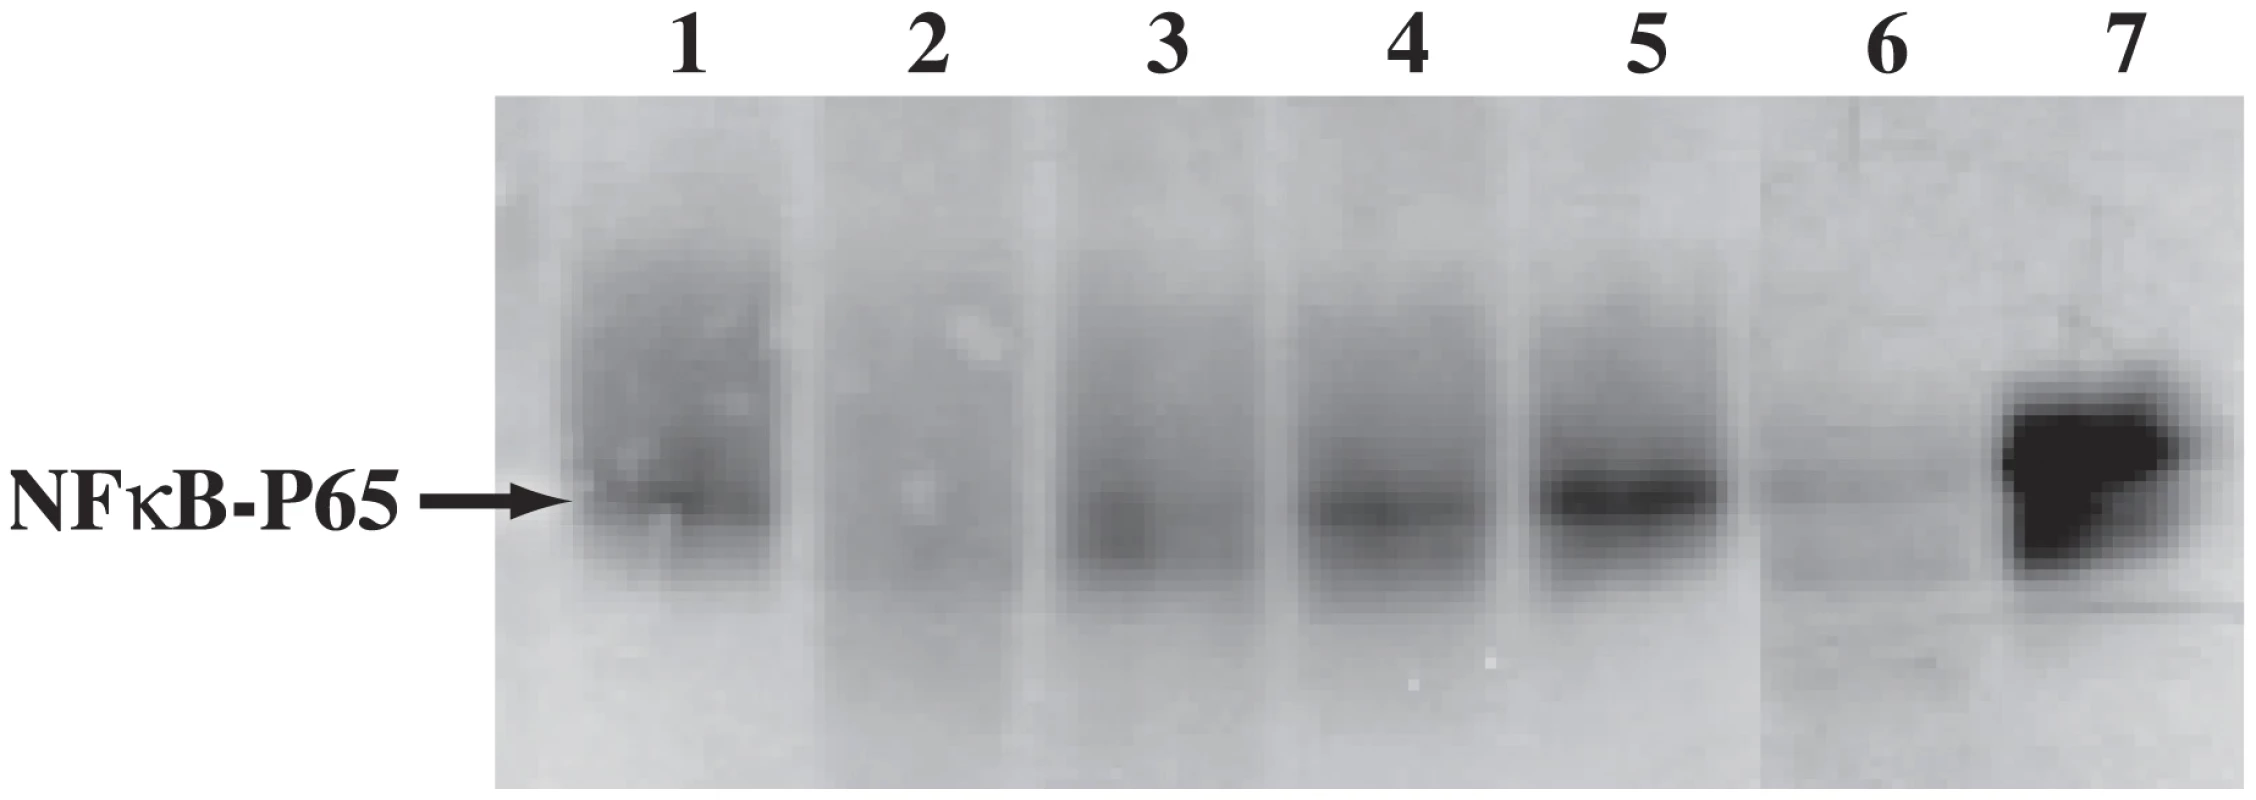 Proteolytic cleavage of r-human NF-κB P65 by wild type- and r-cruzain but not by proteases expressed by cruzain-deficient <i>T. cruzi.</i>